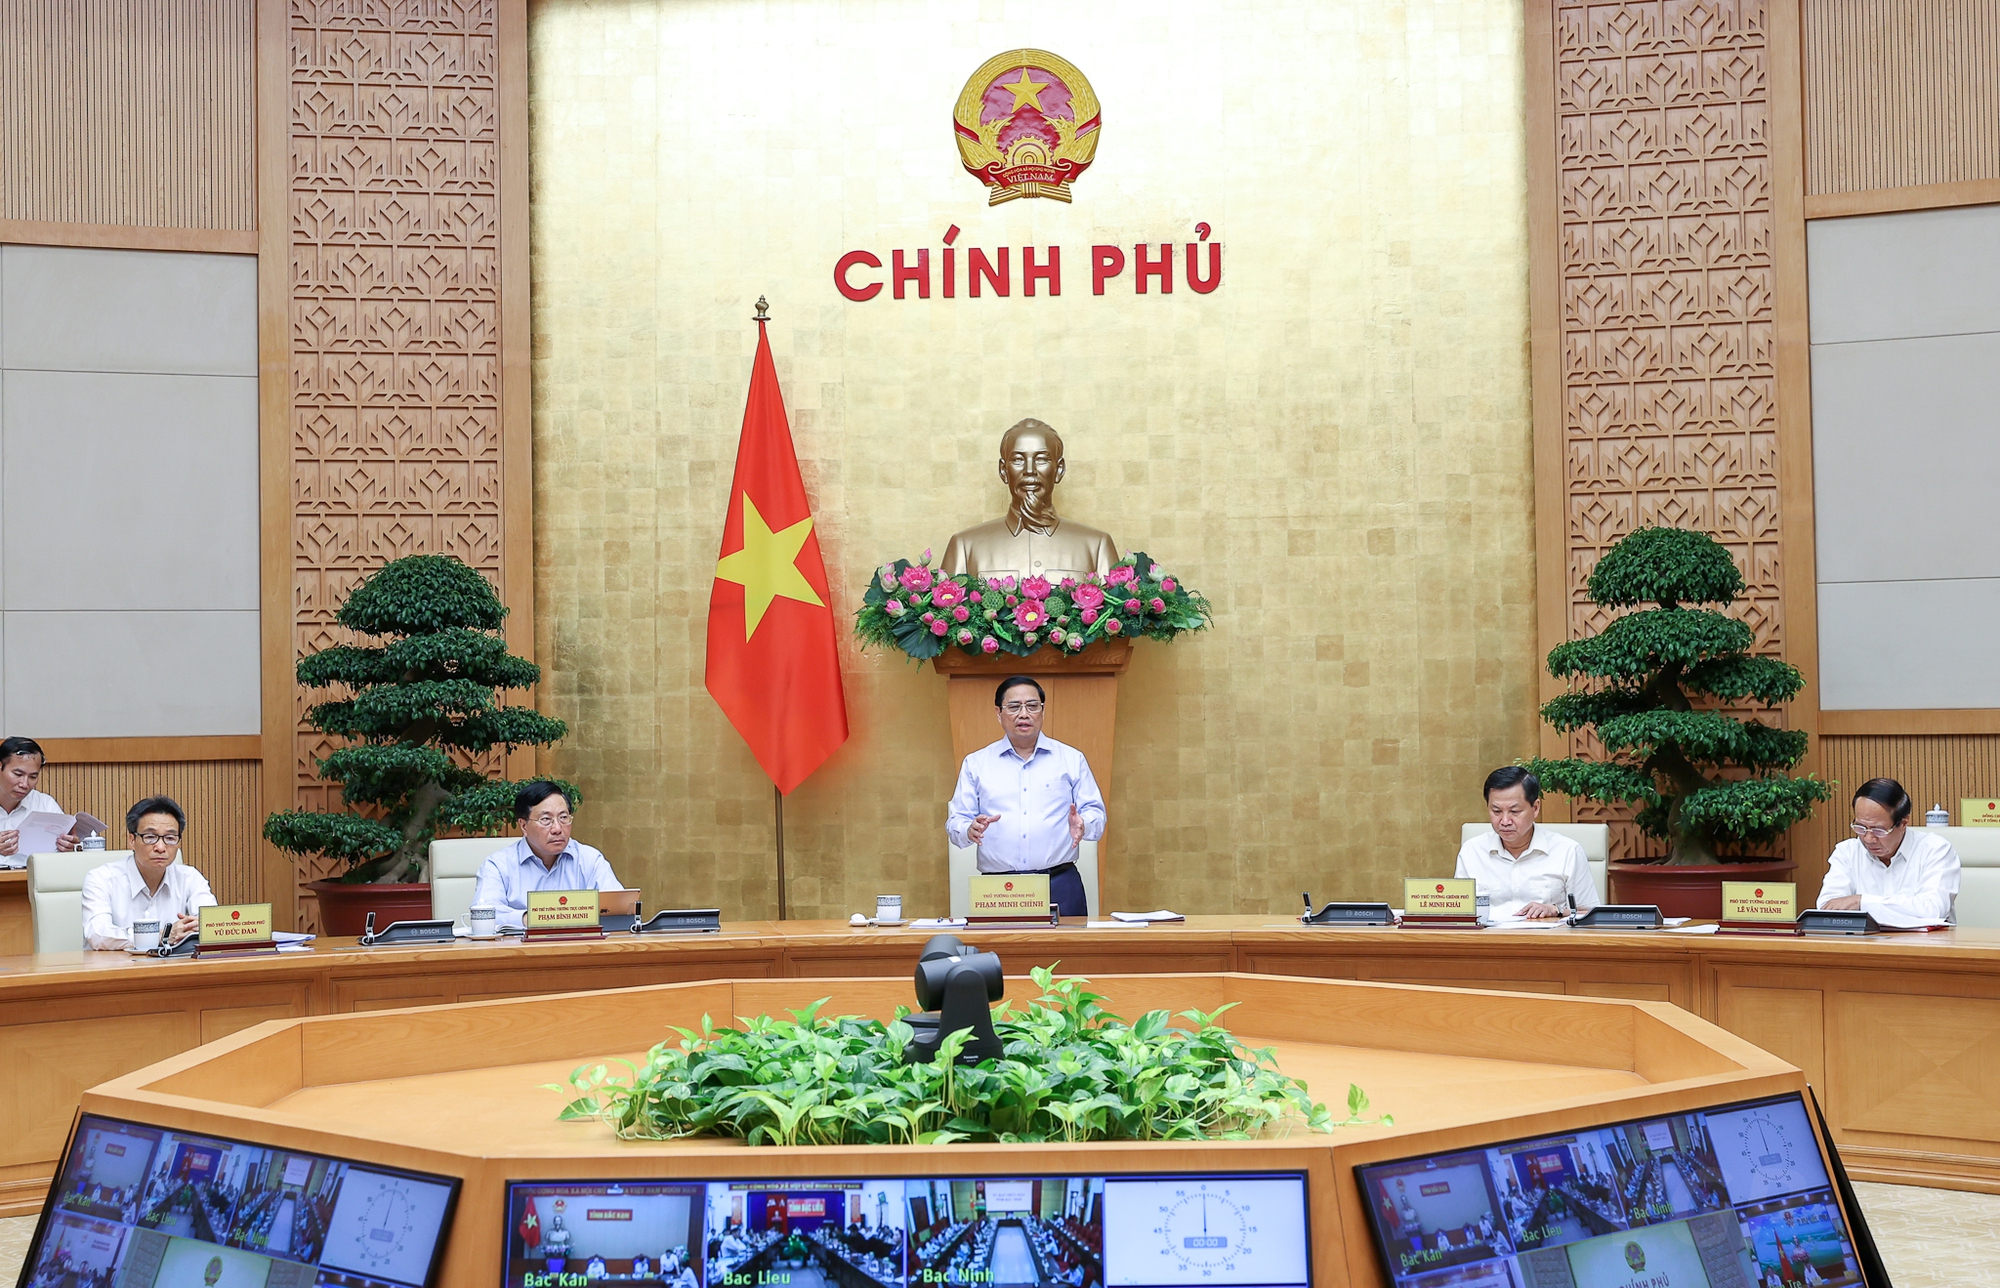 Duties powers and responsibilities of entities and persons involved in public investment activities in Vietnam